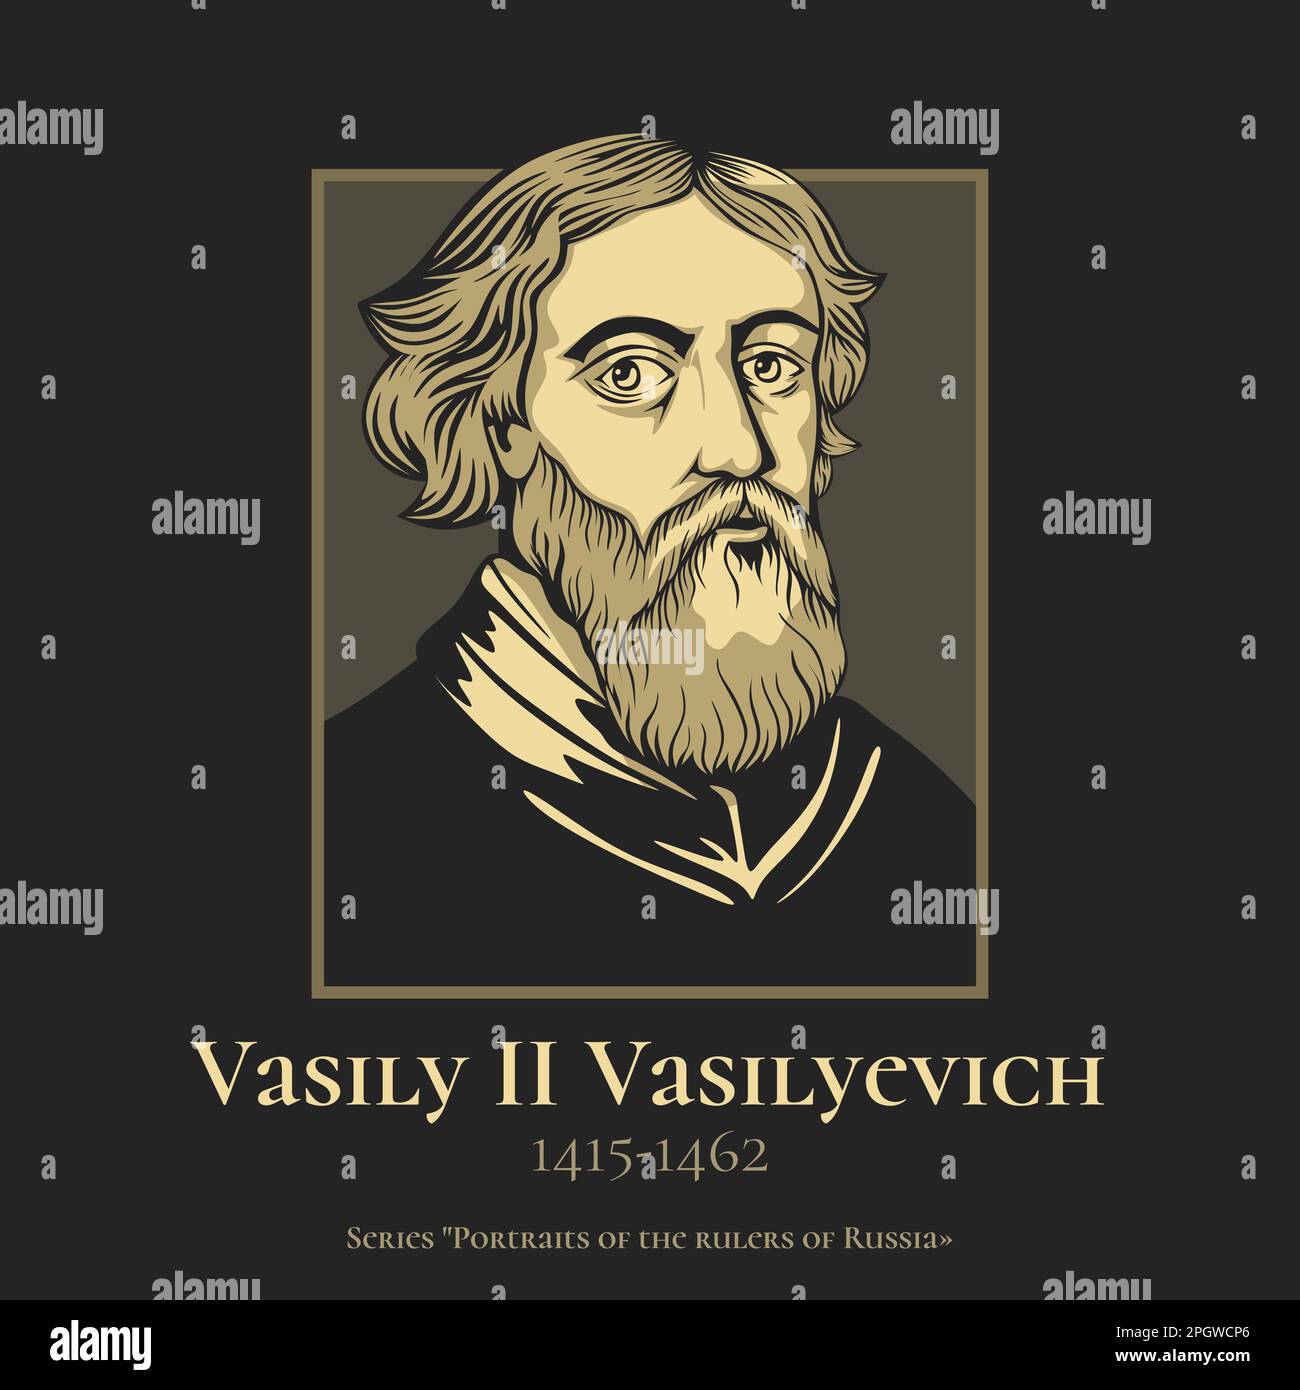 Vasily II Vasilyevich (1415-1462), also known as Vasily the Blind, was the Grand Prince of Moscow, whose long reign (1425-1462) Stock Vector